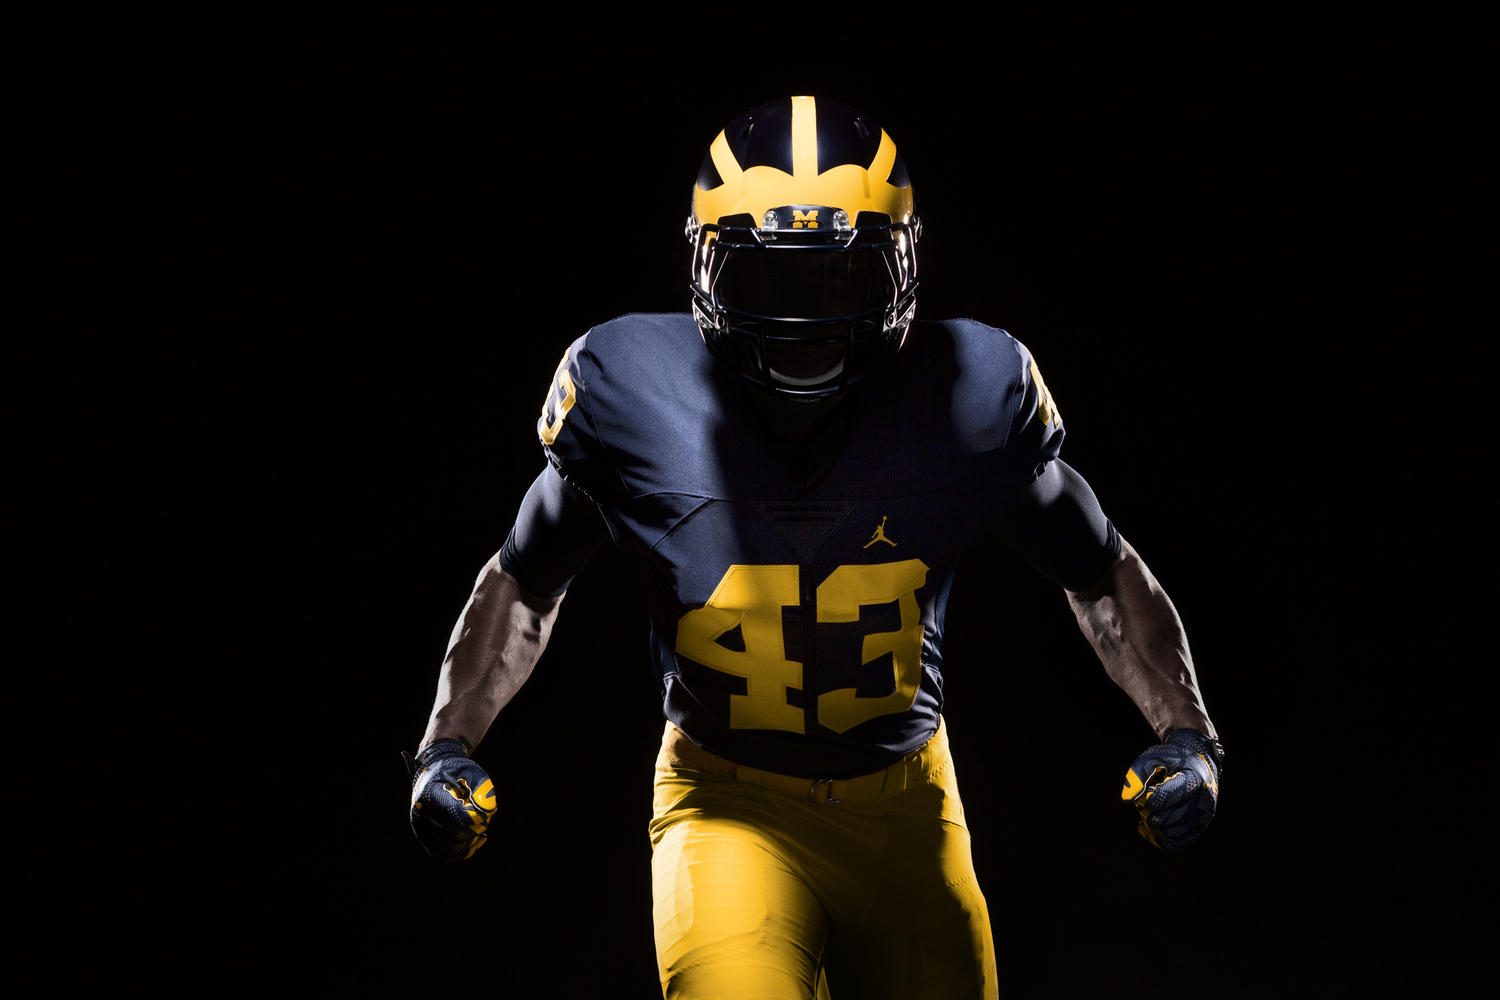 More Pictures Released Of Michigan's New Jordan Brand Football Uniforms